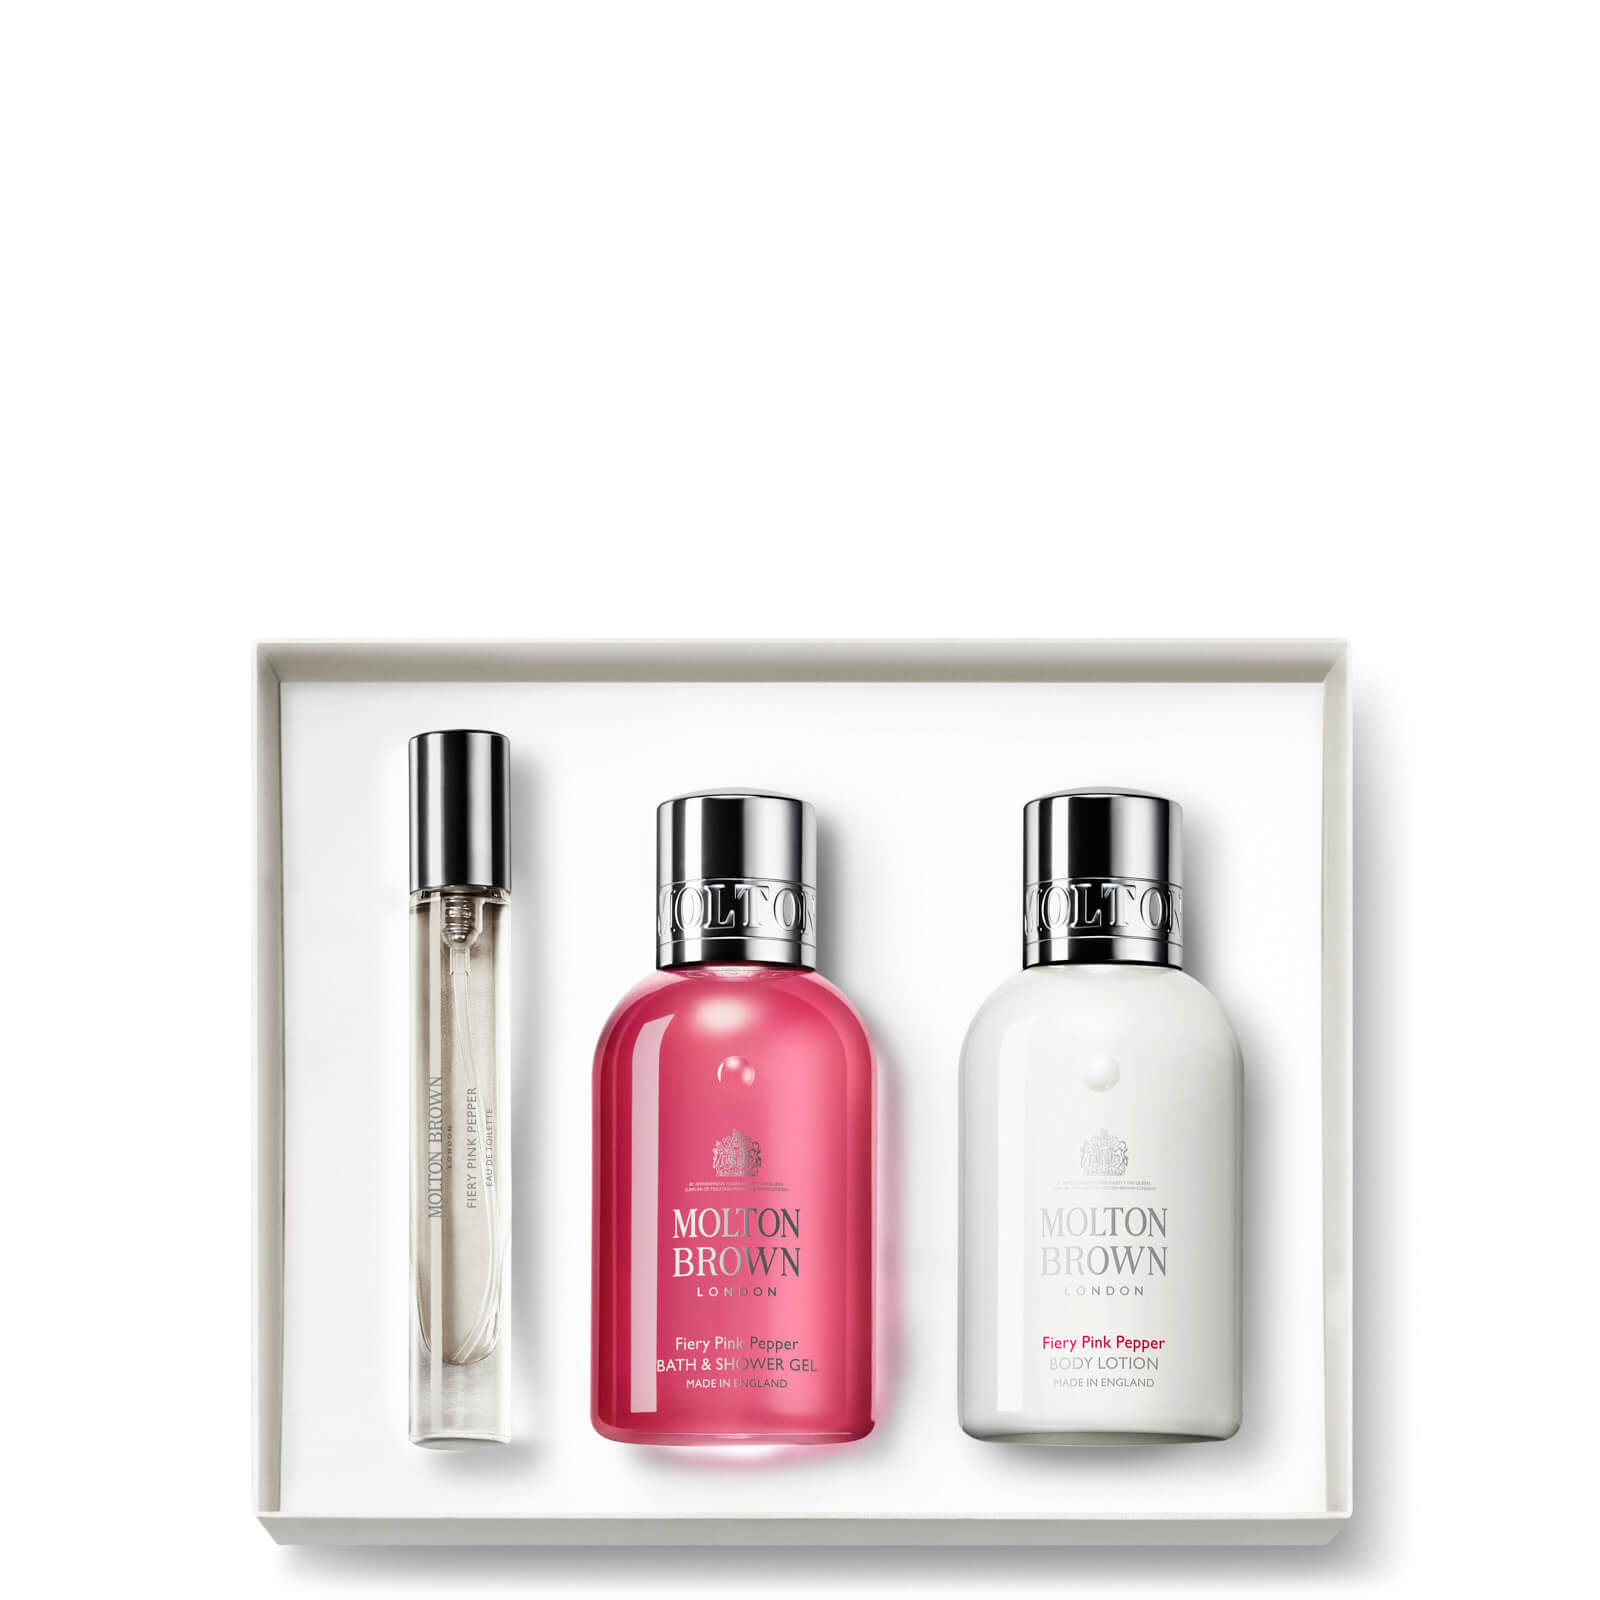 Molton Brown Fiery Pink Pepper Fragrance Set